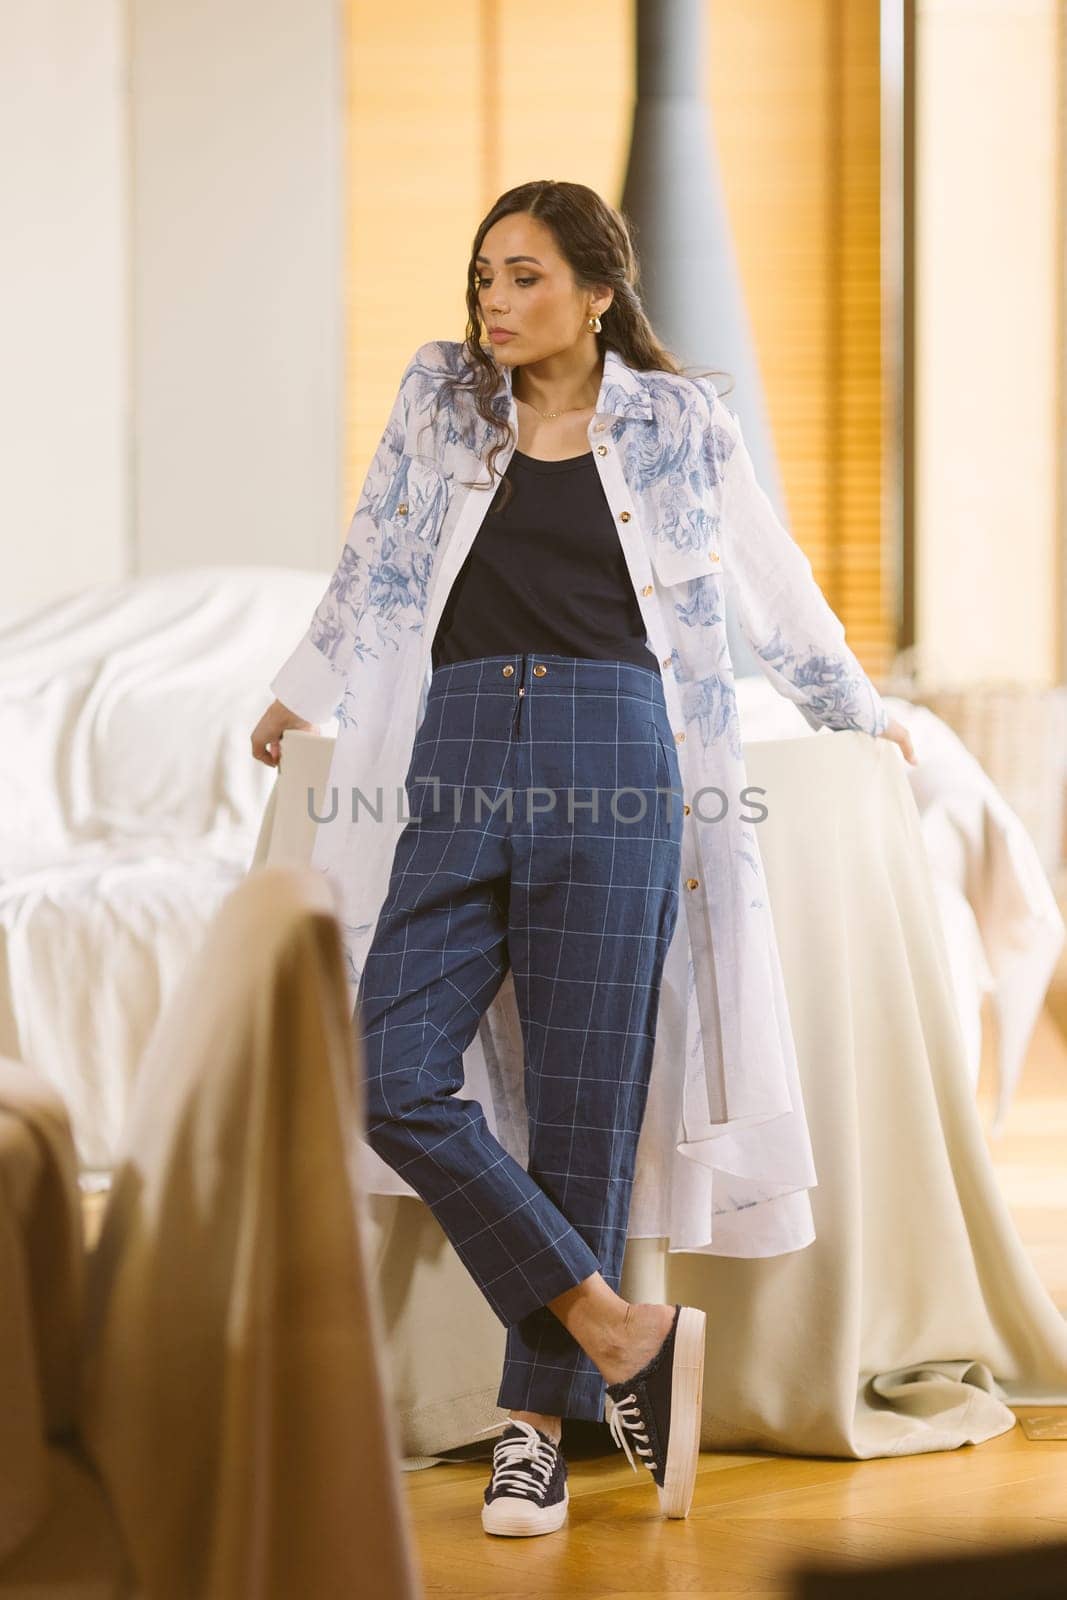 Fashionable confident woman wearing elegant suit, trousers posing in interior. by sarymsakov